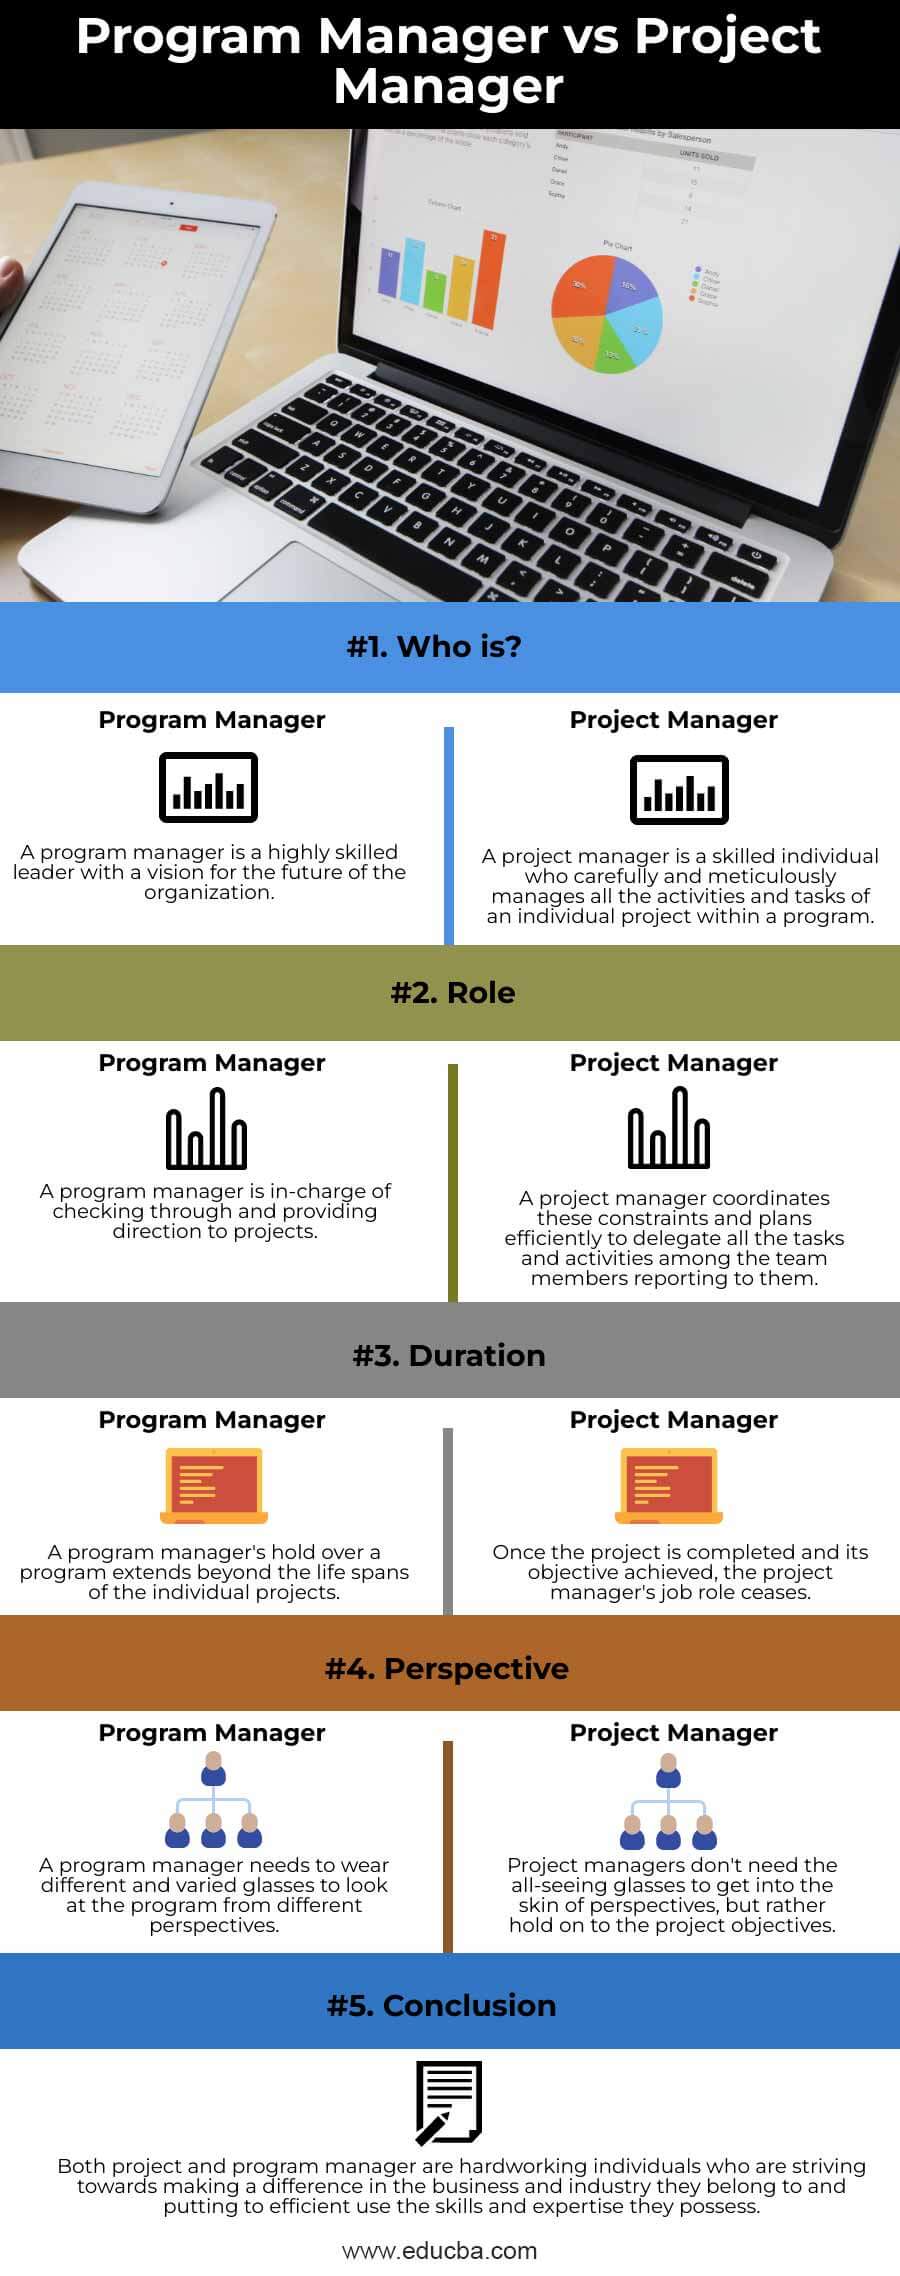 Program-Manager-vs-Project-Manager-info